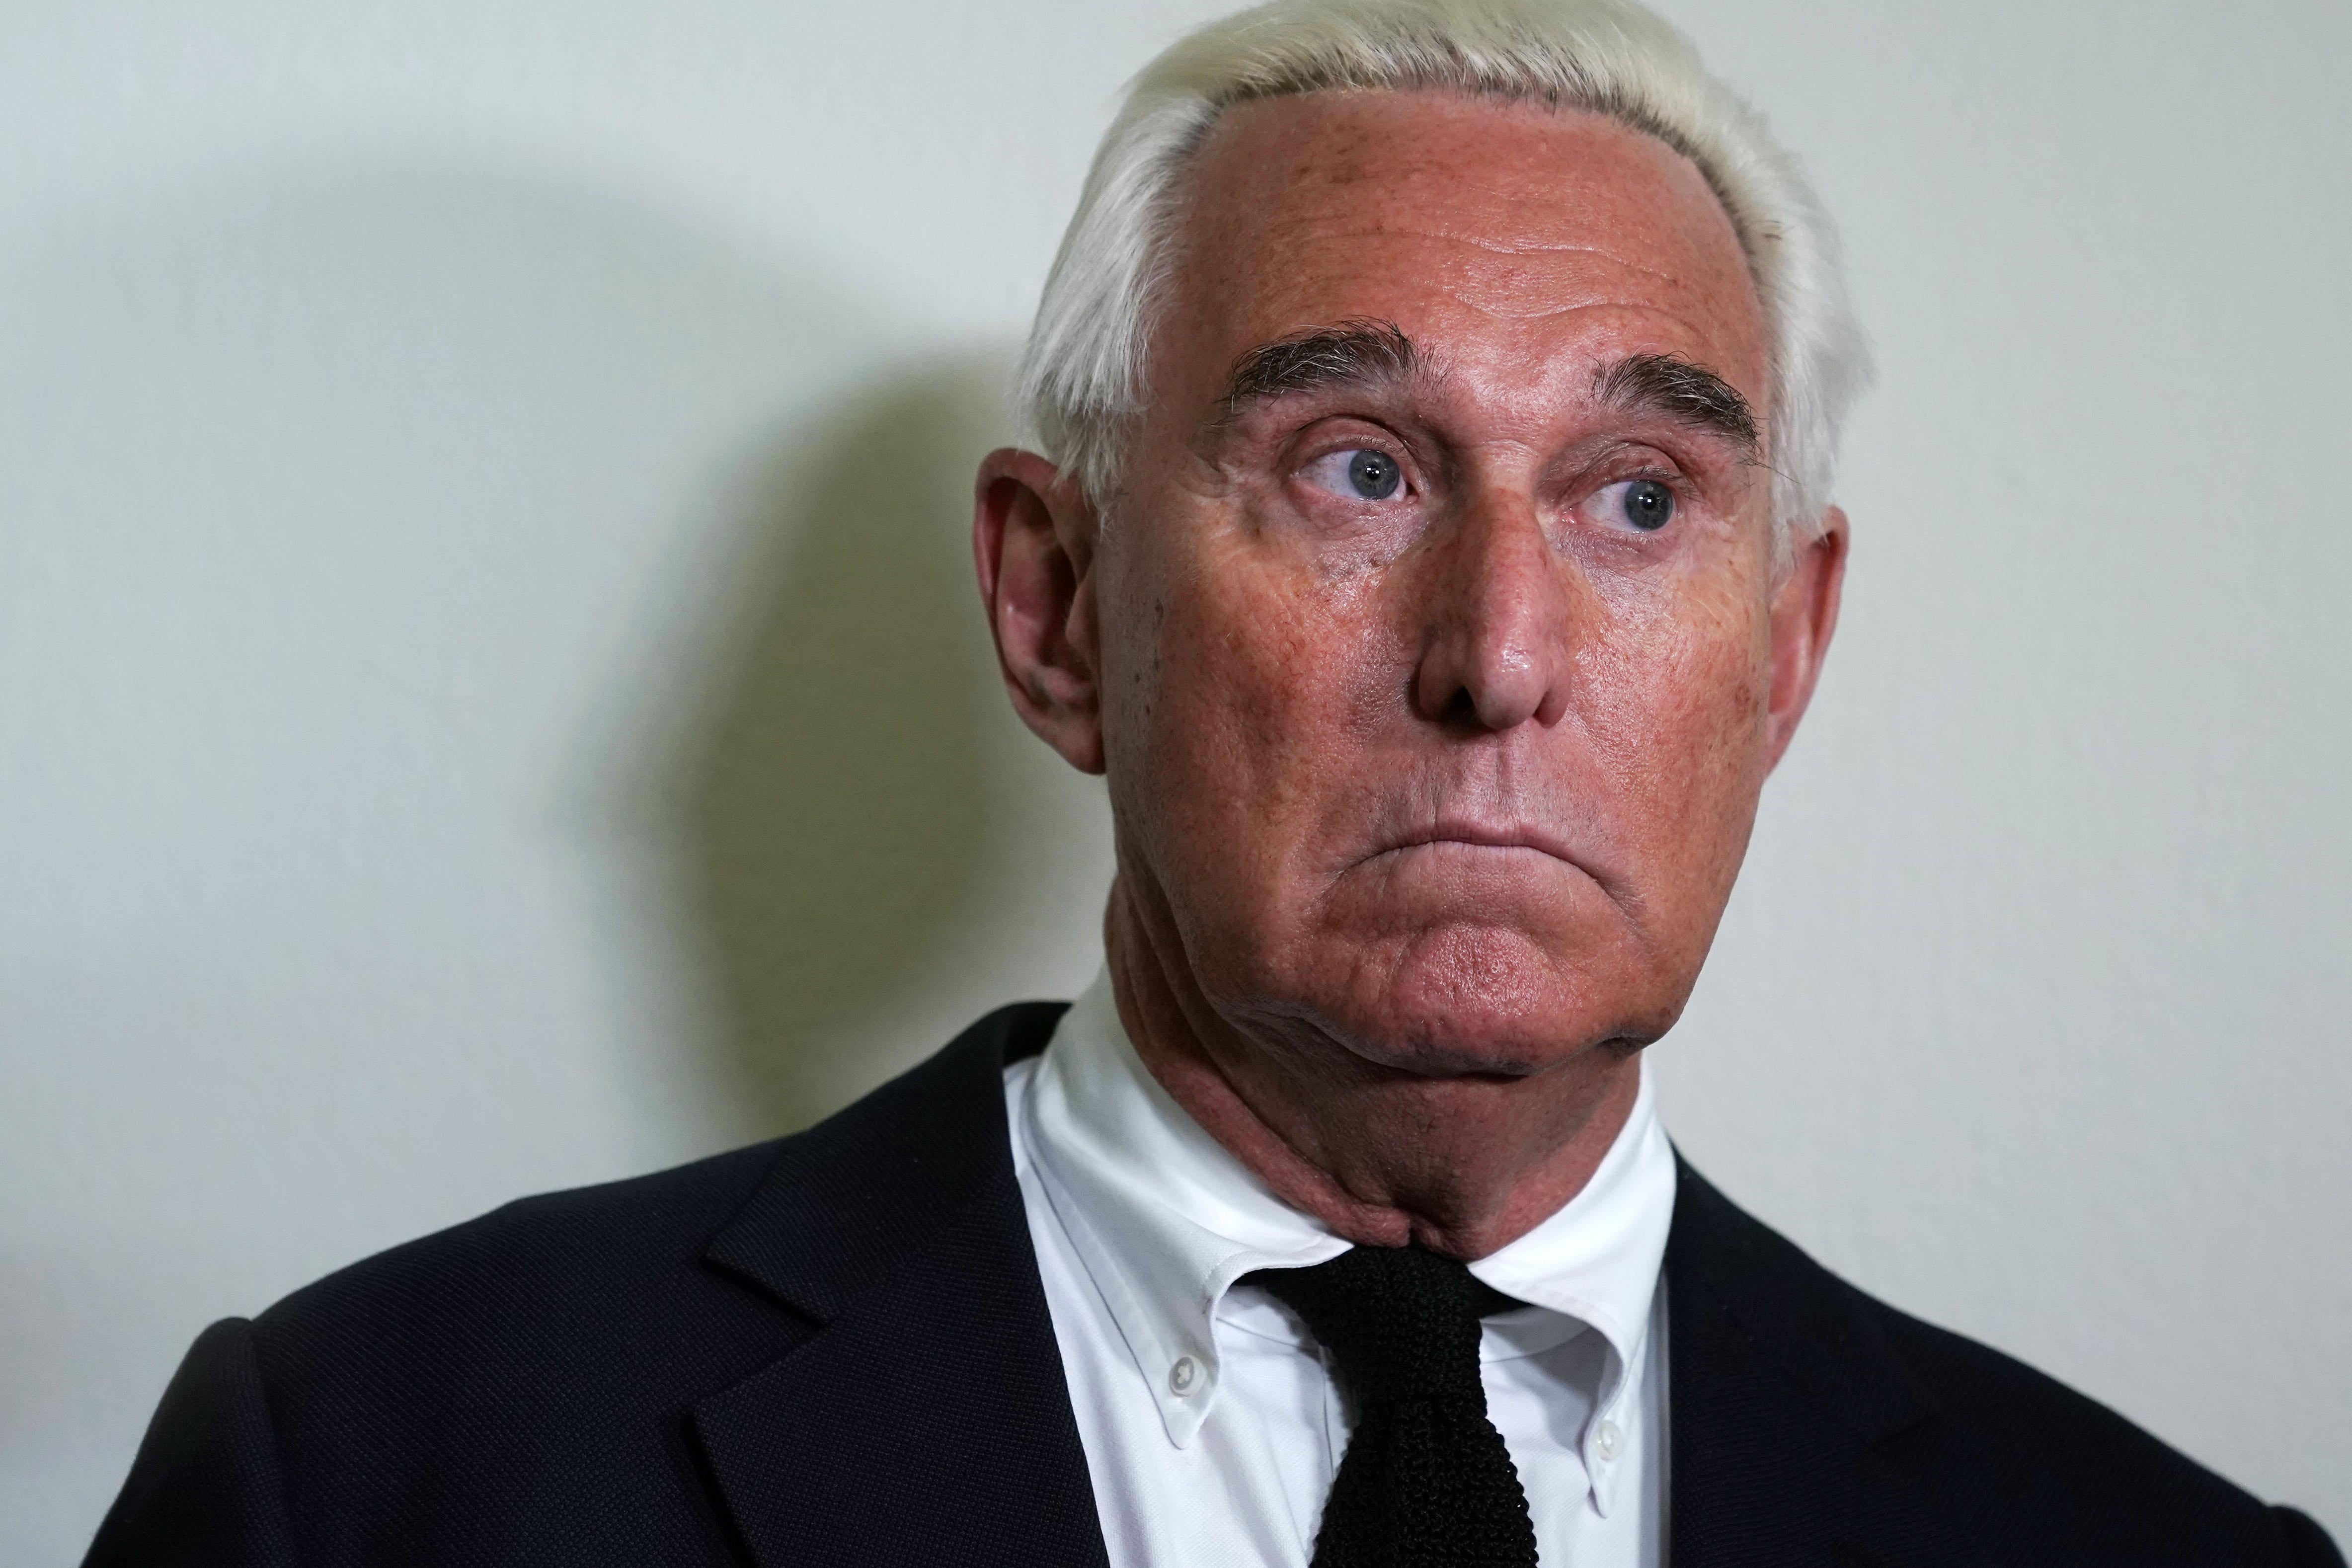 Roger Stone outside congressional hearing